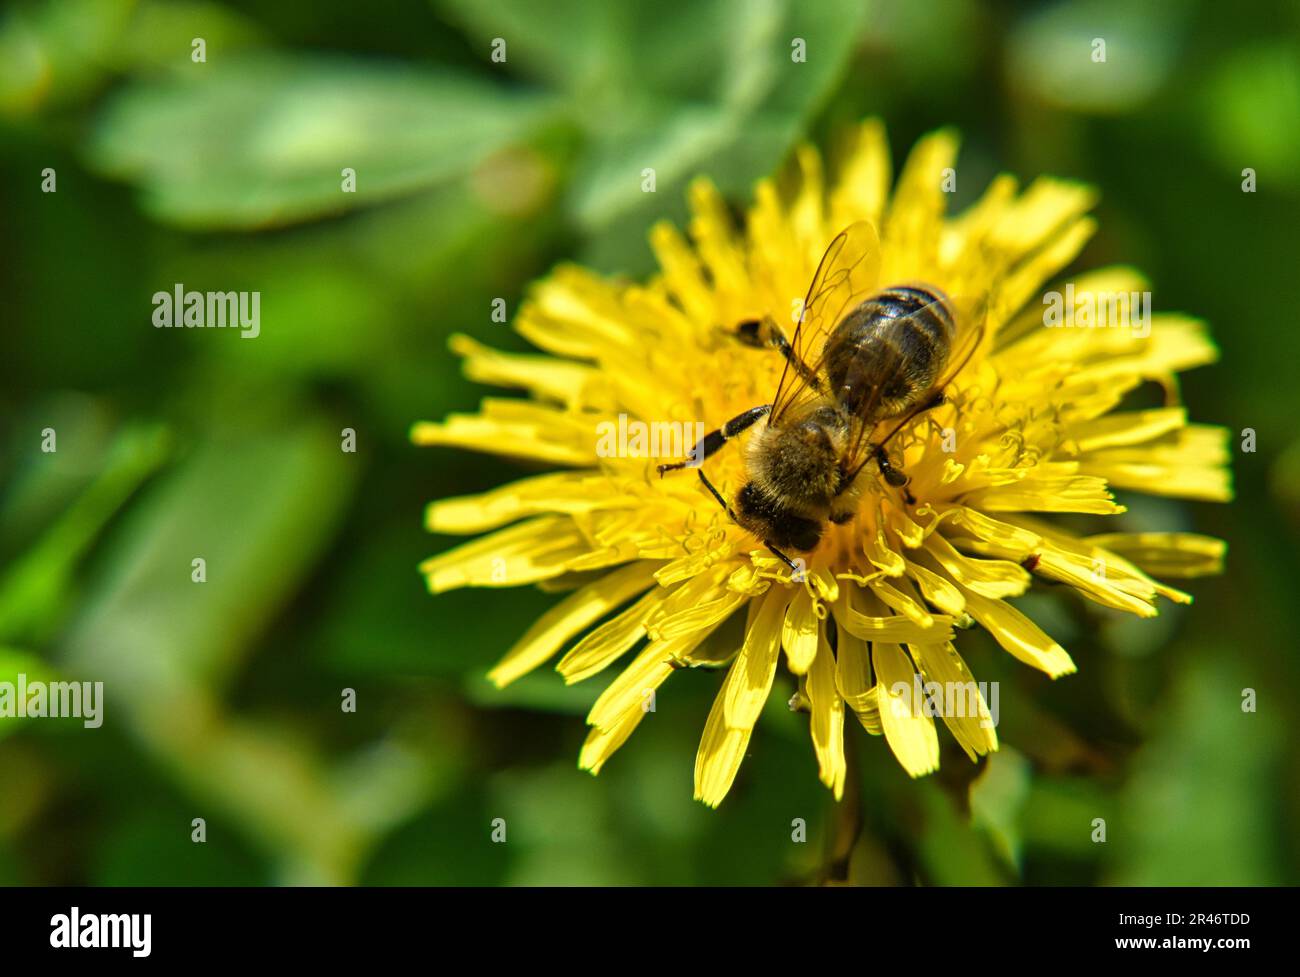 A closeup of bee sipping nectar from flower on blurred background Stock Photo